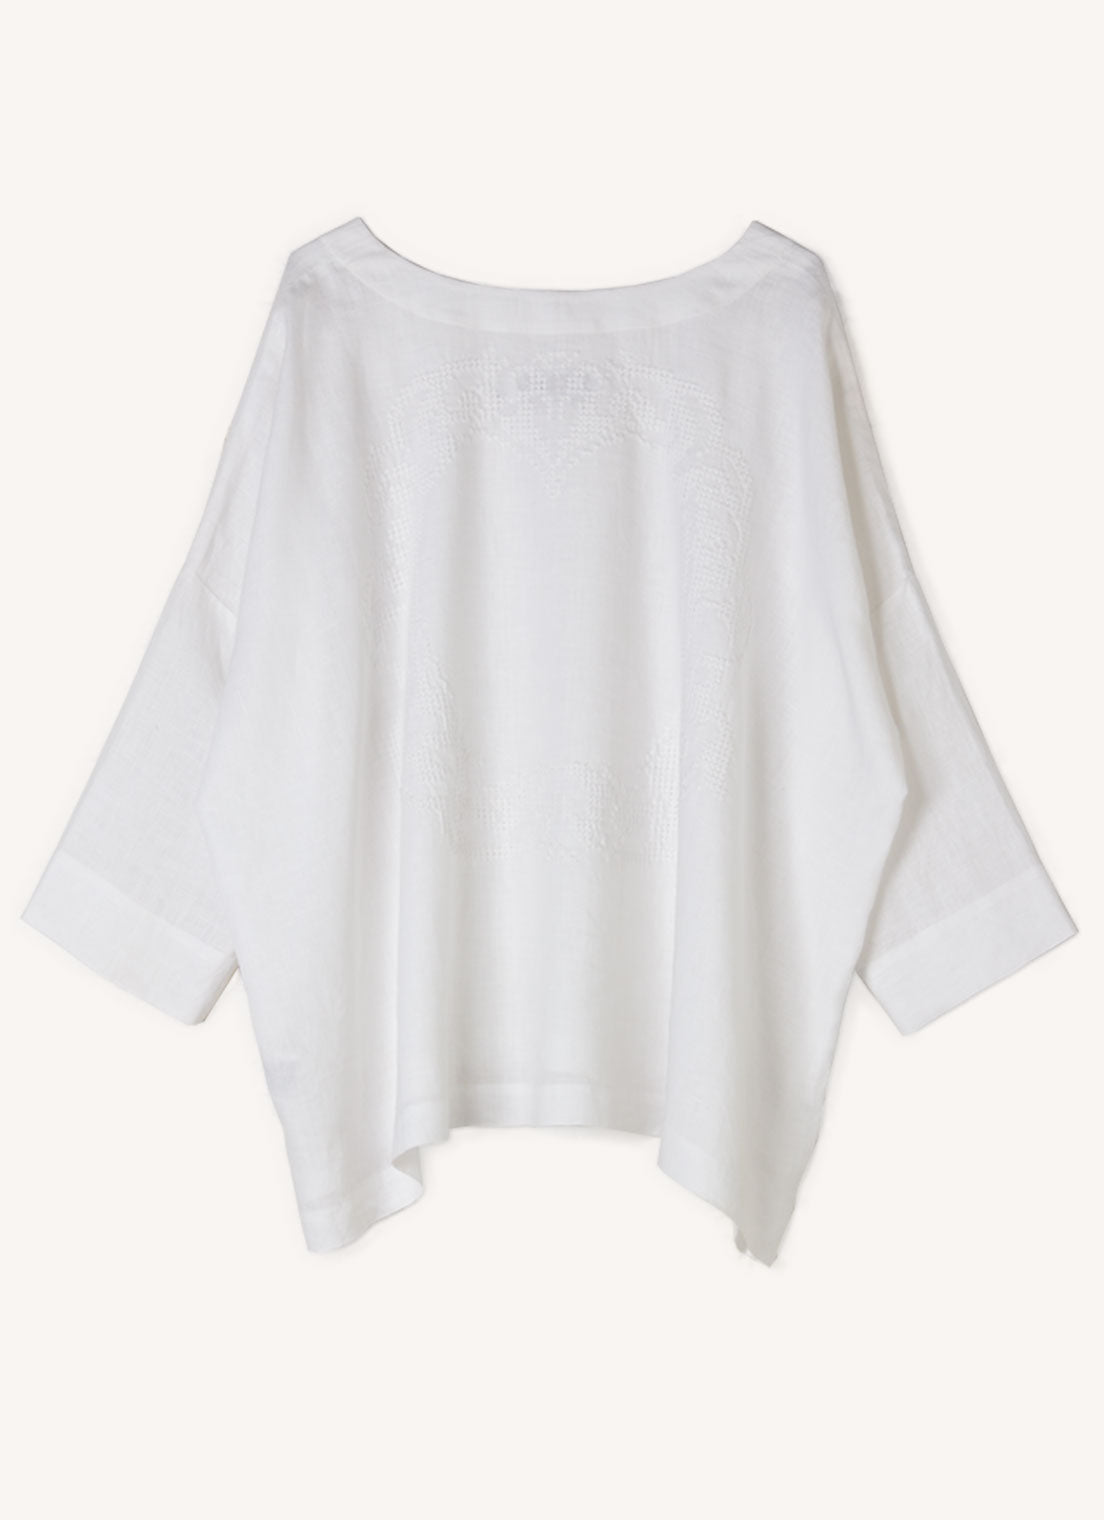 A white, easy fit top with round neckline, long sleeves and embroidered detail at the back made from European pure linen